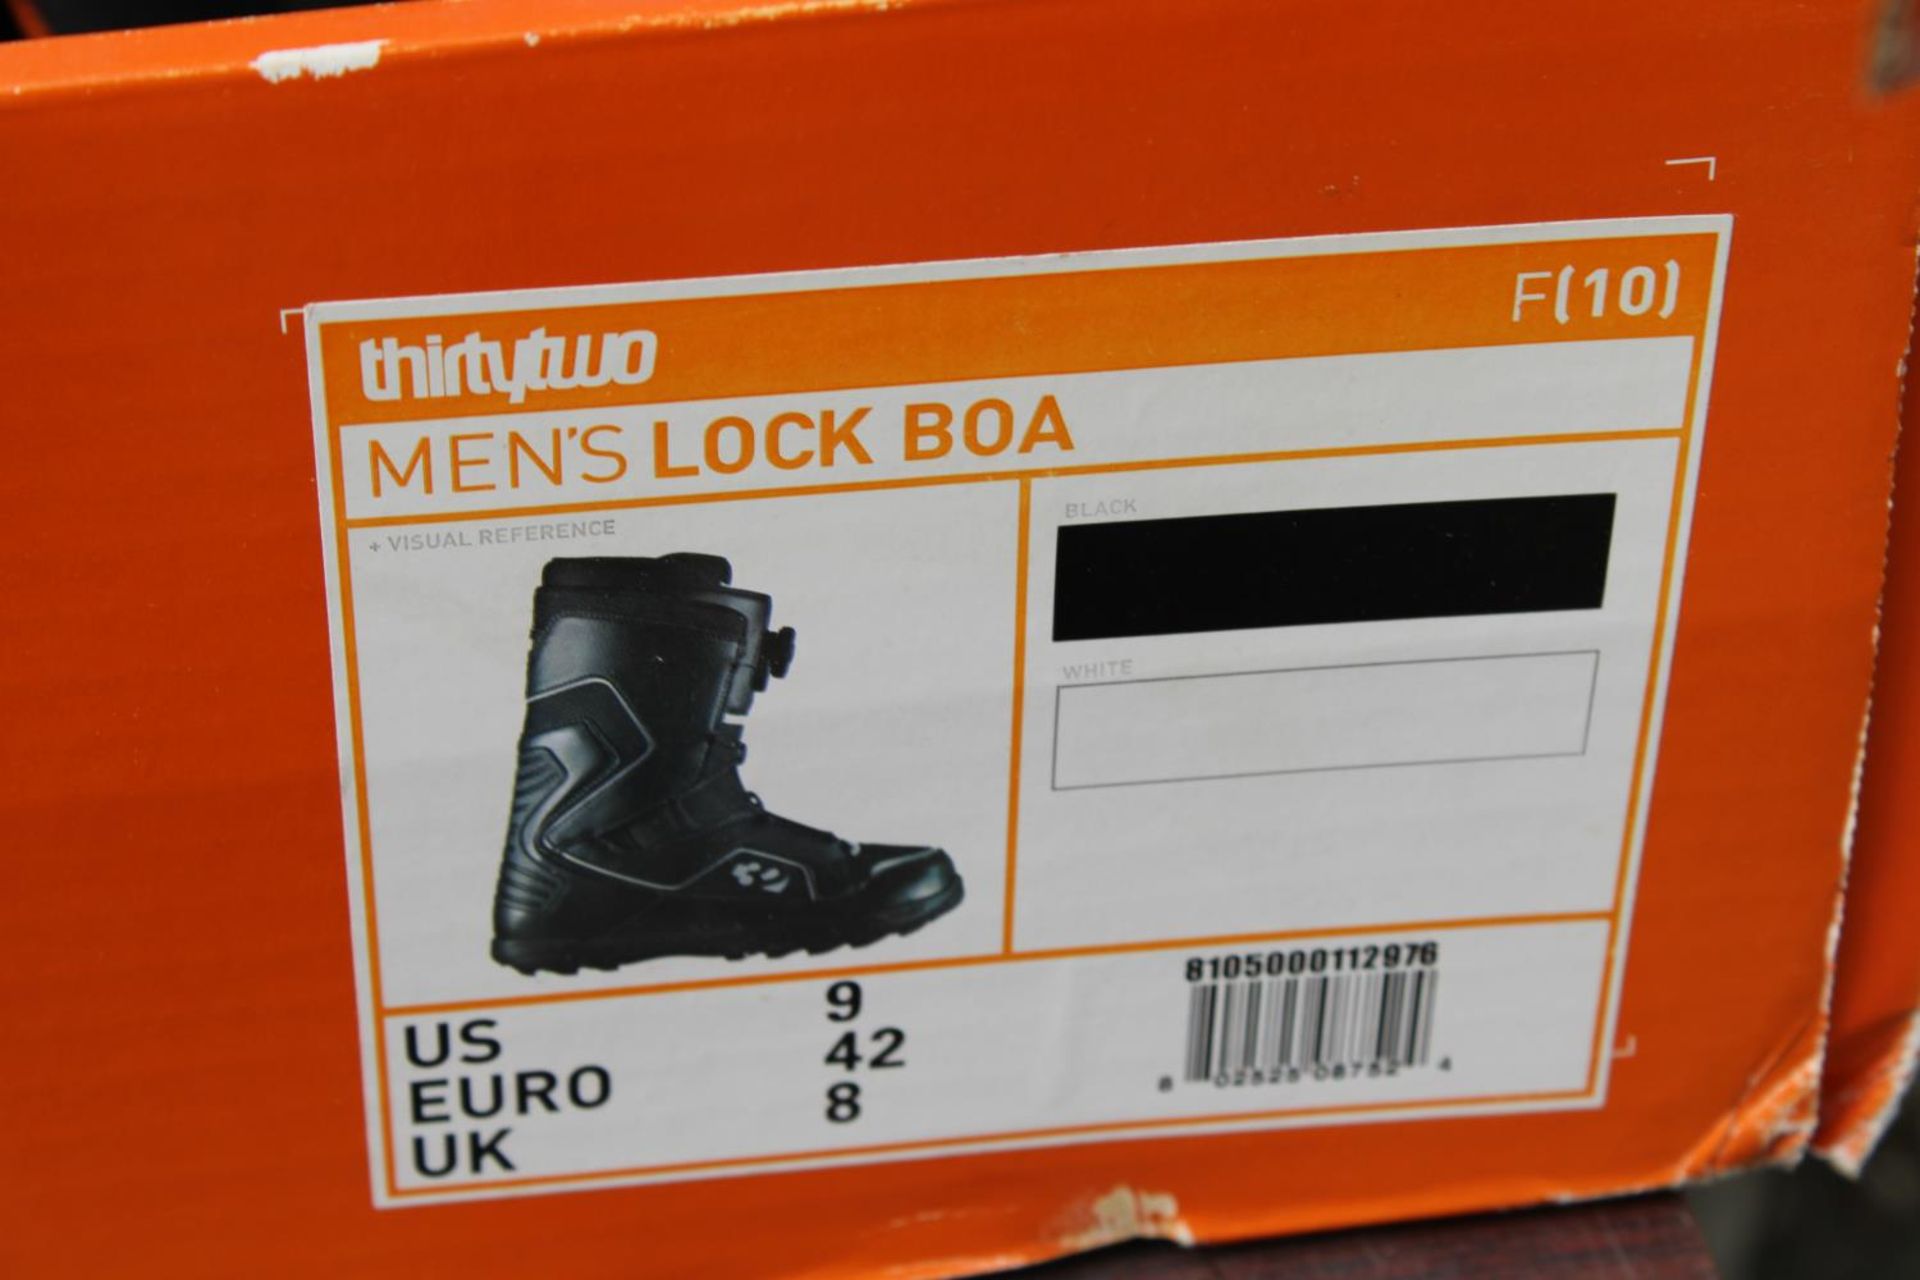 A PAIR OF VANS SNOWBOARDING BOOTS (N.B BOX DOESN'T MATCH THE BOOTS) - Image 6 of 6